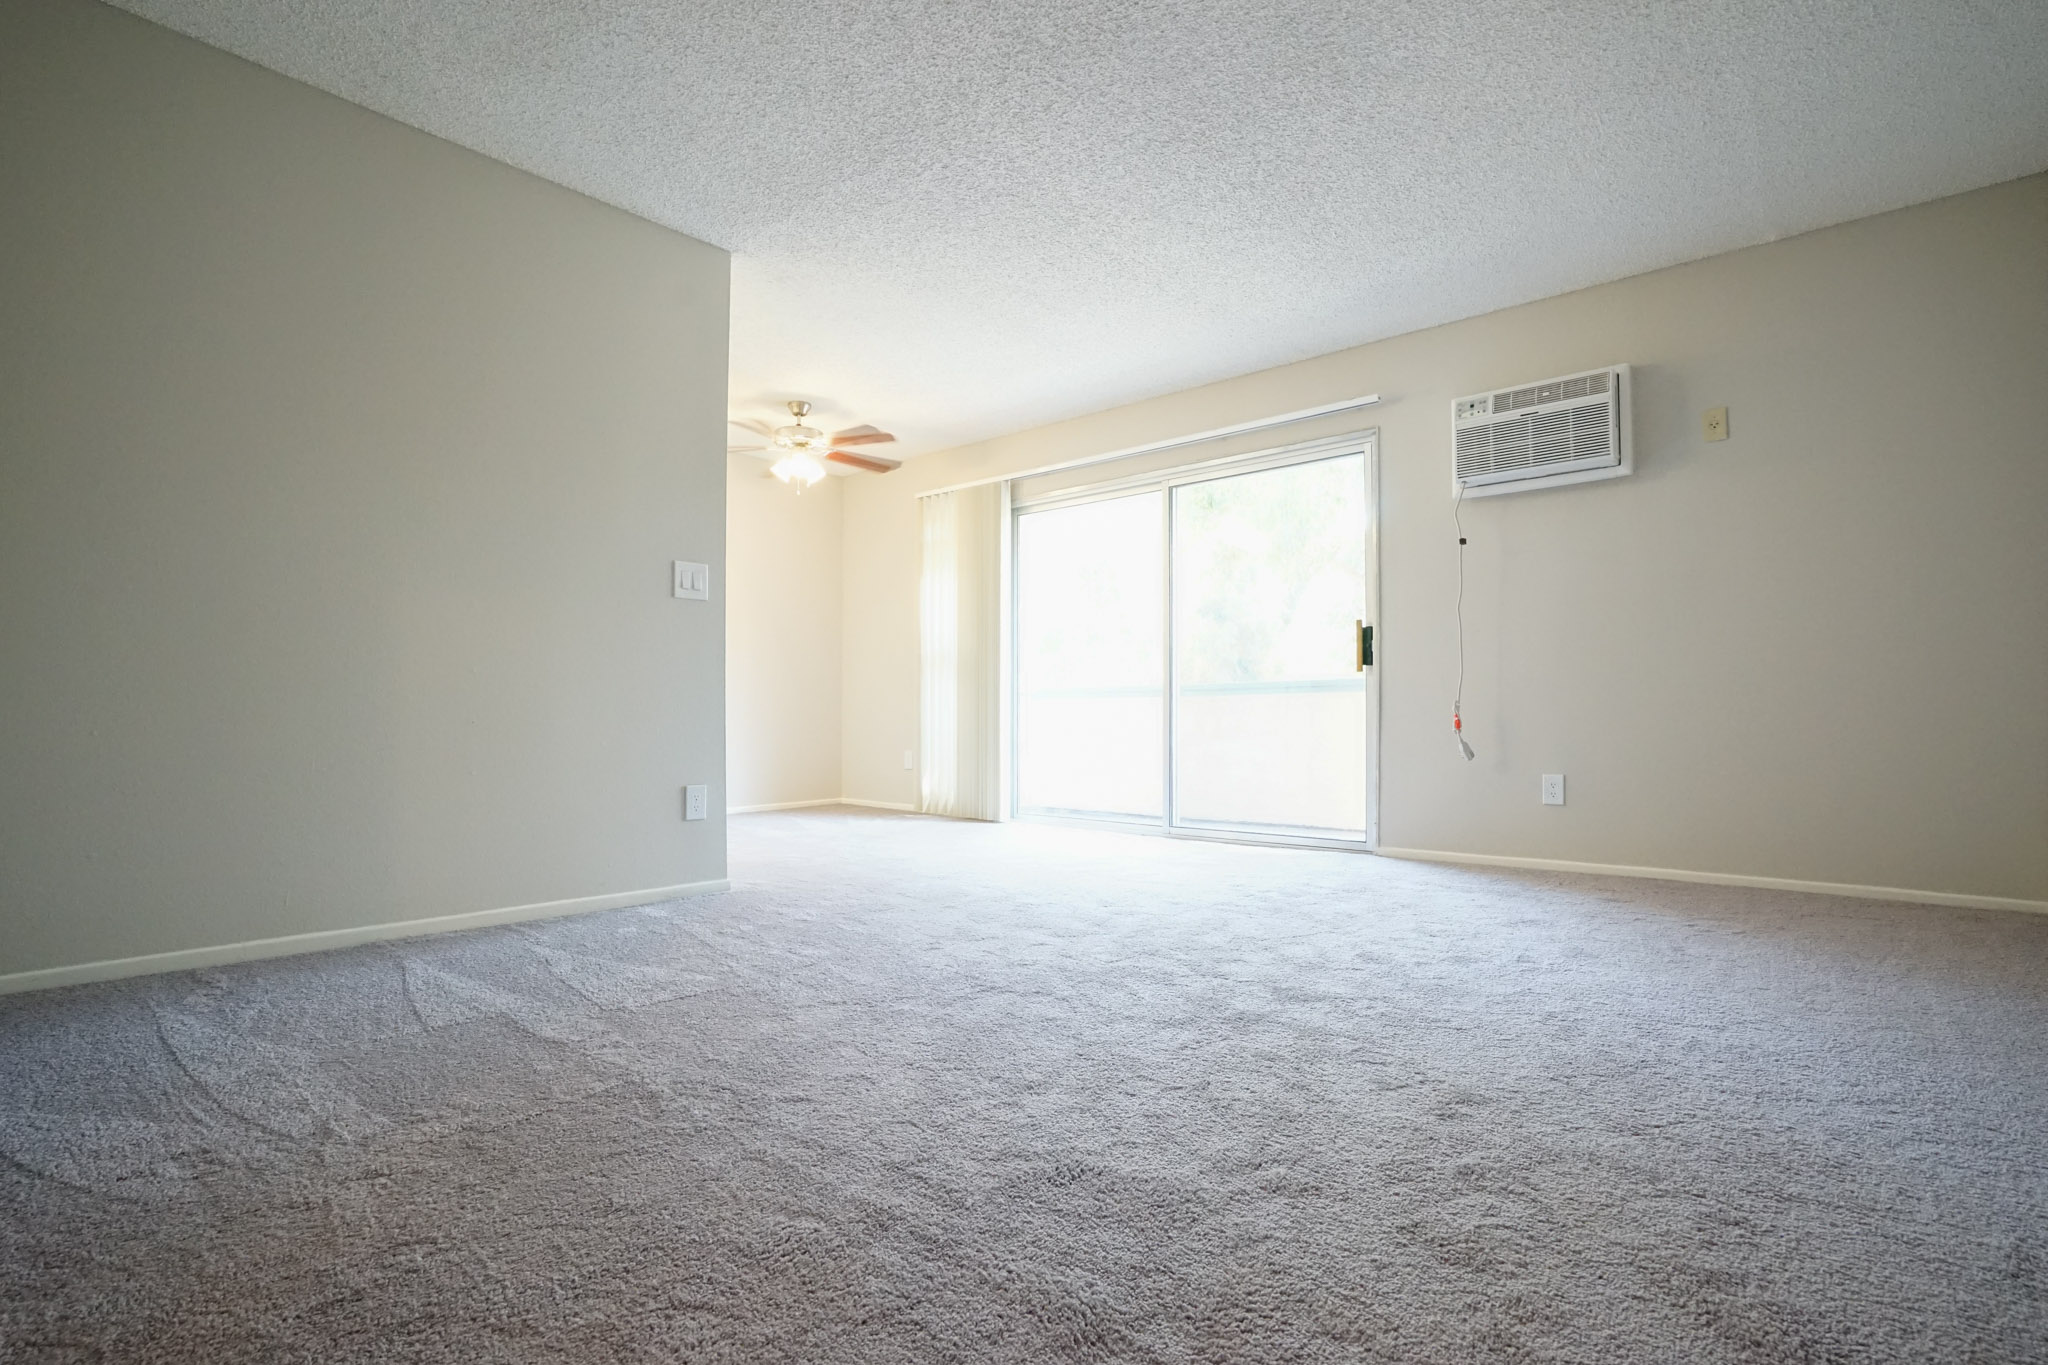 Living room with a large sliding door. There is a ceiling fan and an air conditioner mounted on the wall. Floor is carpeted.